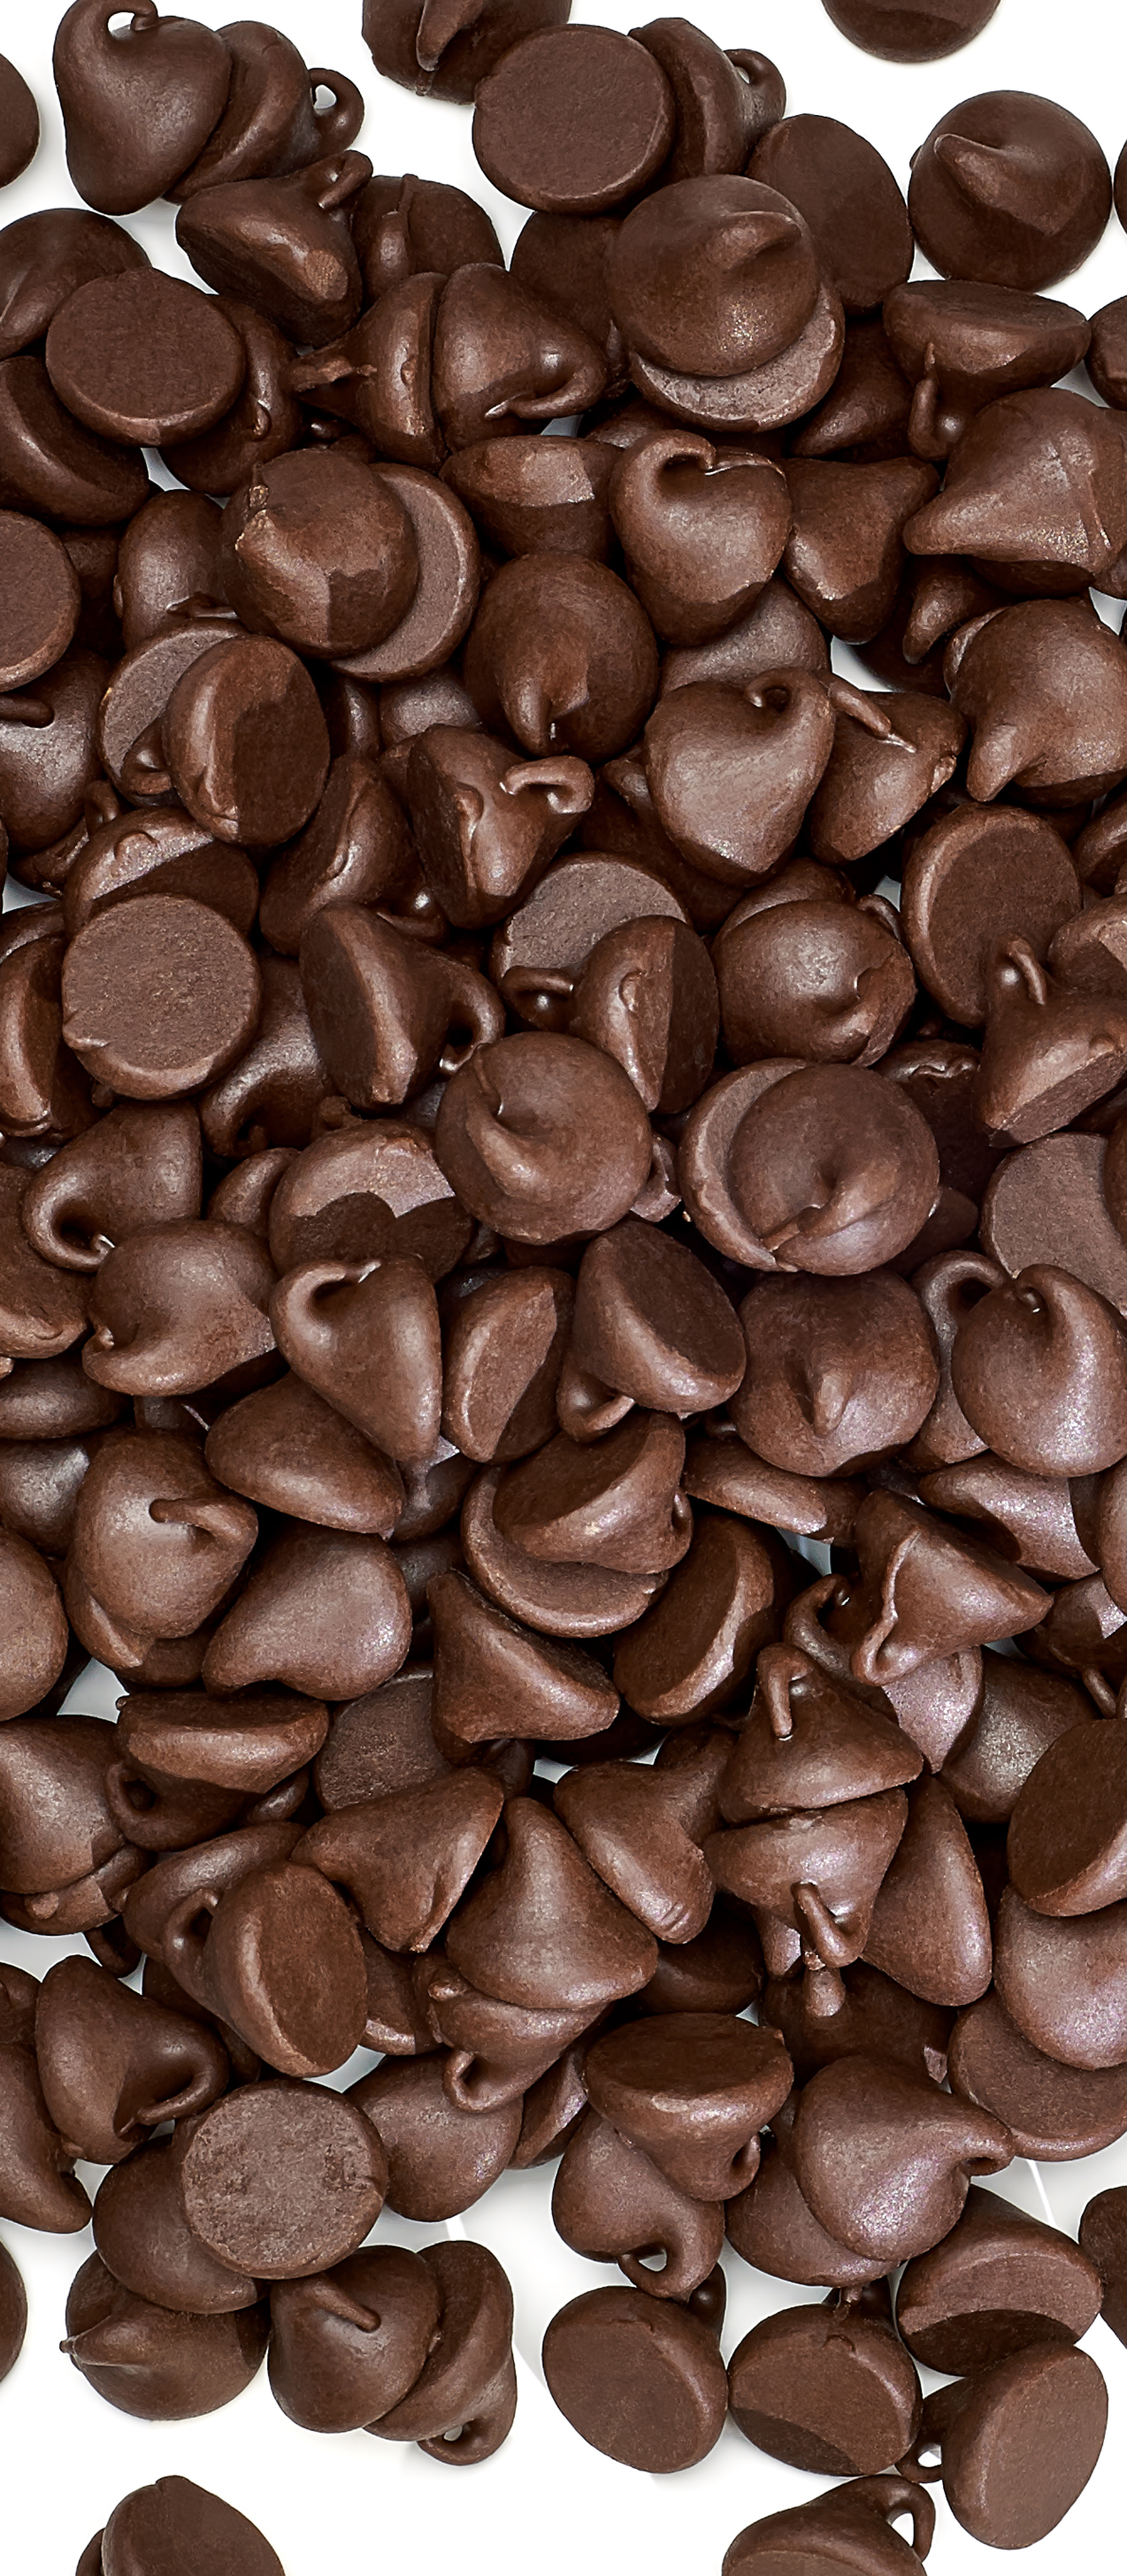 Interest in health, wellbeing drives better-for-you chocolate products